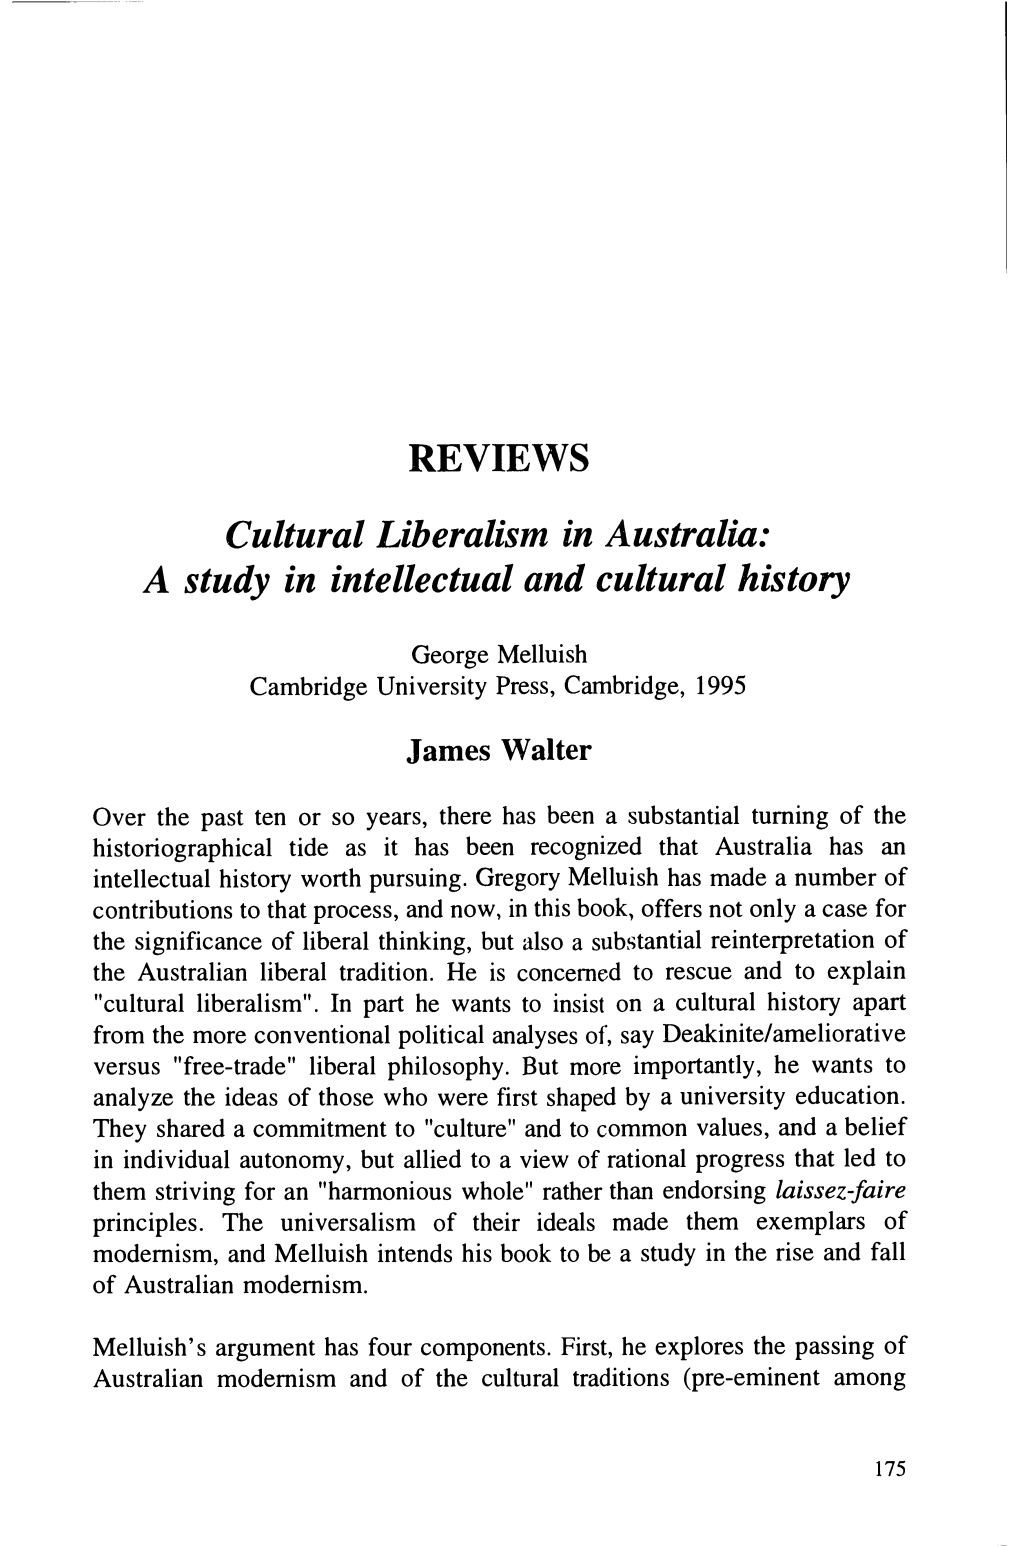 REVIEWS Cultural Liberalism in Australia: a Study in Intellectual and Cultural History